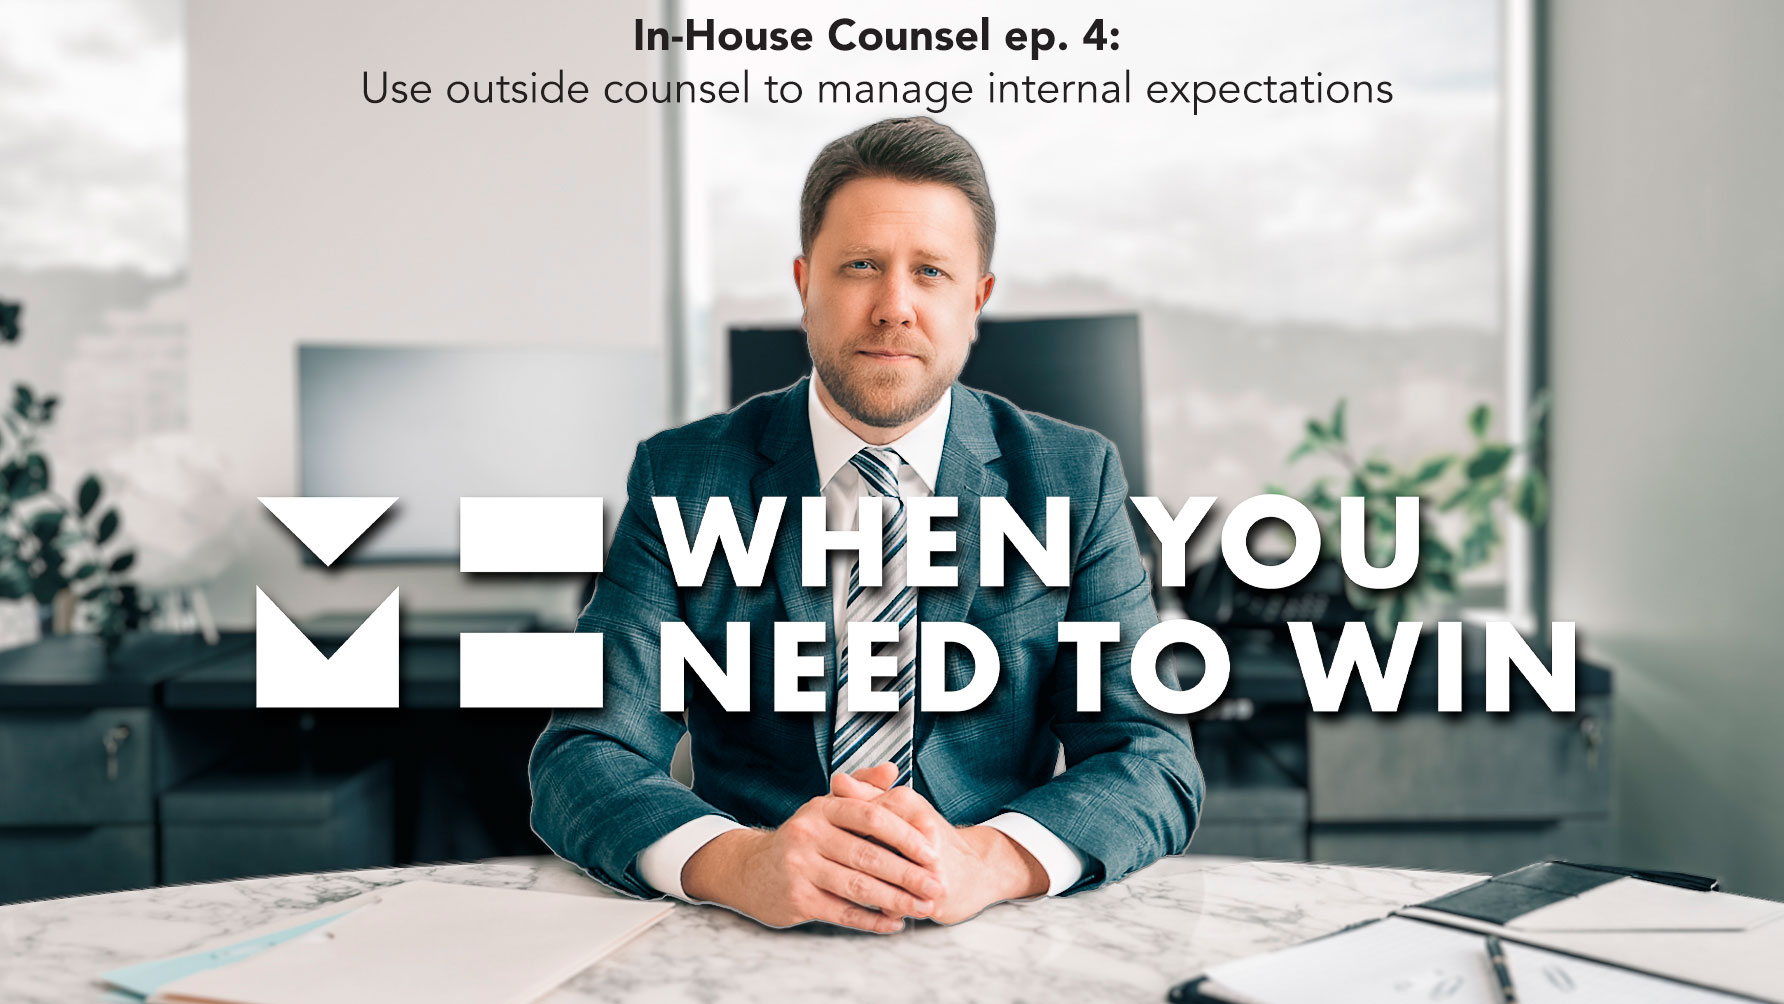 When You Need to Win - In-House Counsel - Use Outside Counsel to Manage Internal Expectations